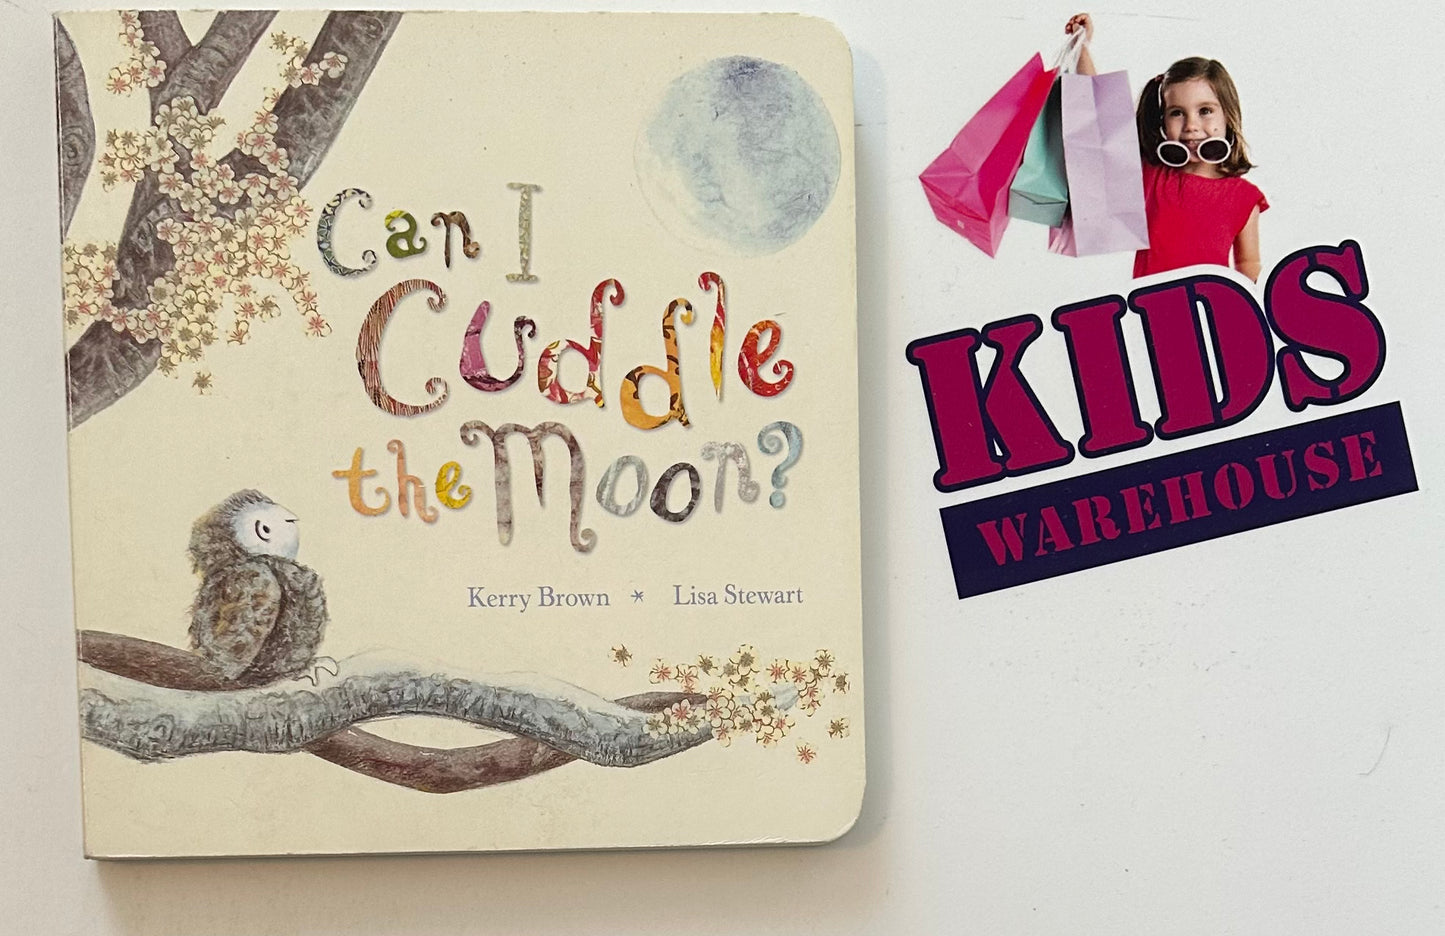 Can I Cuddle the Moon? (Board Book) - Kerry Brown & Lisa Stewart